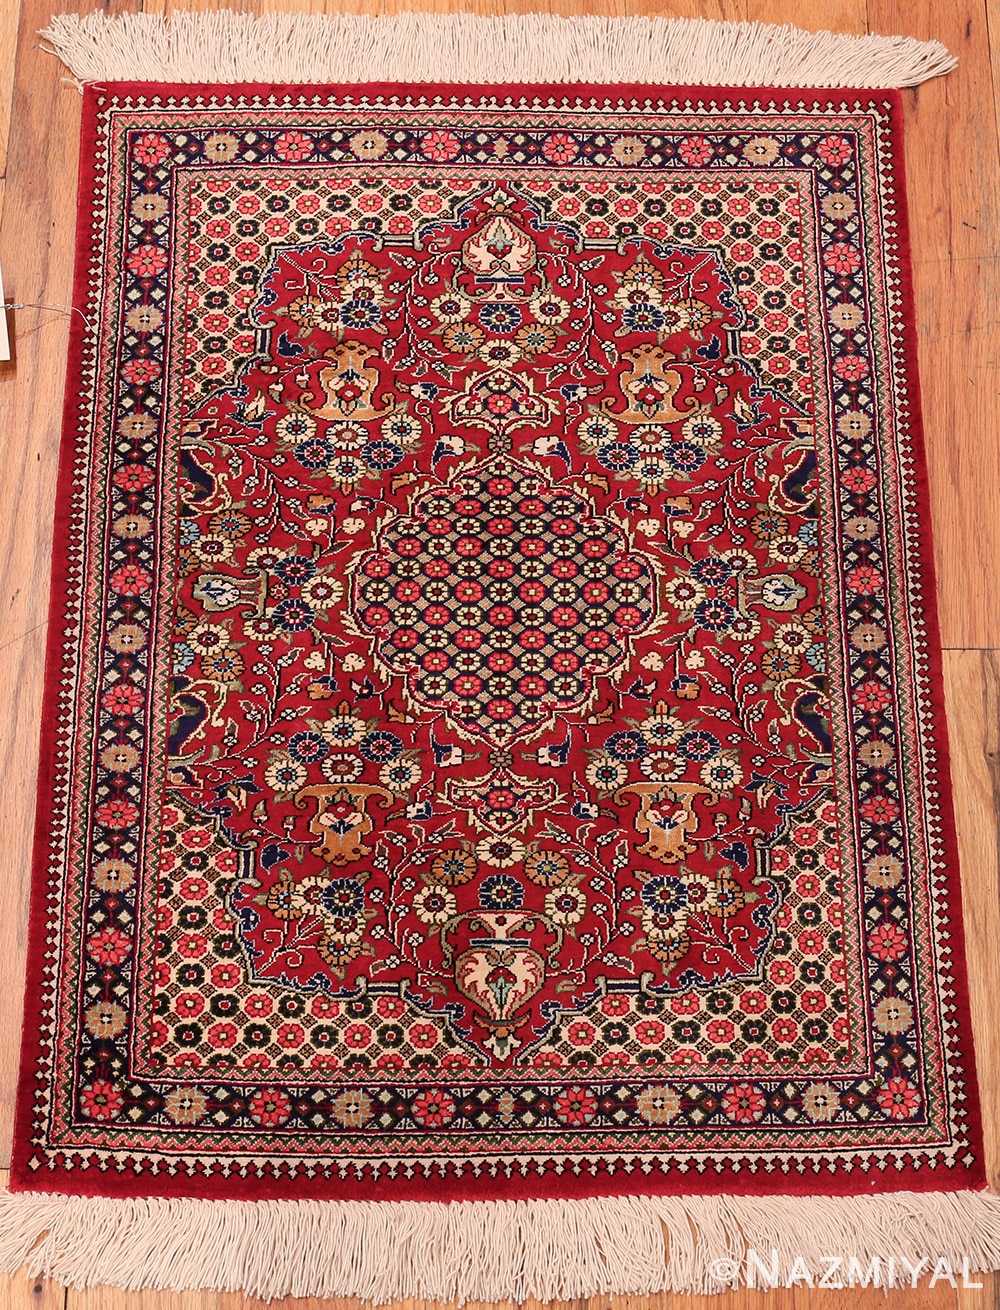 Whole View Of Vase Design Small Vintage Persian Silk Qum Rug 70783 by Nazmiyal NYC